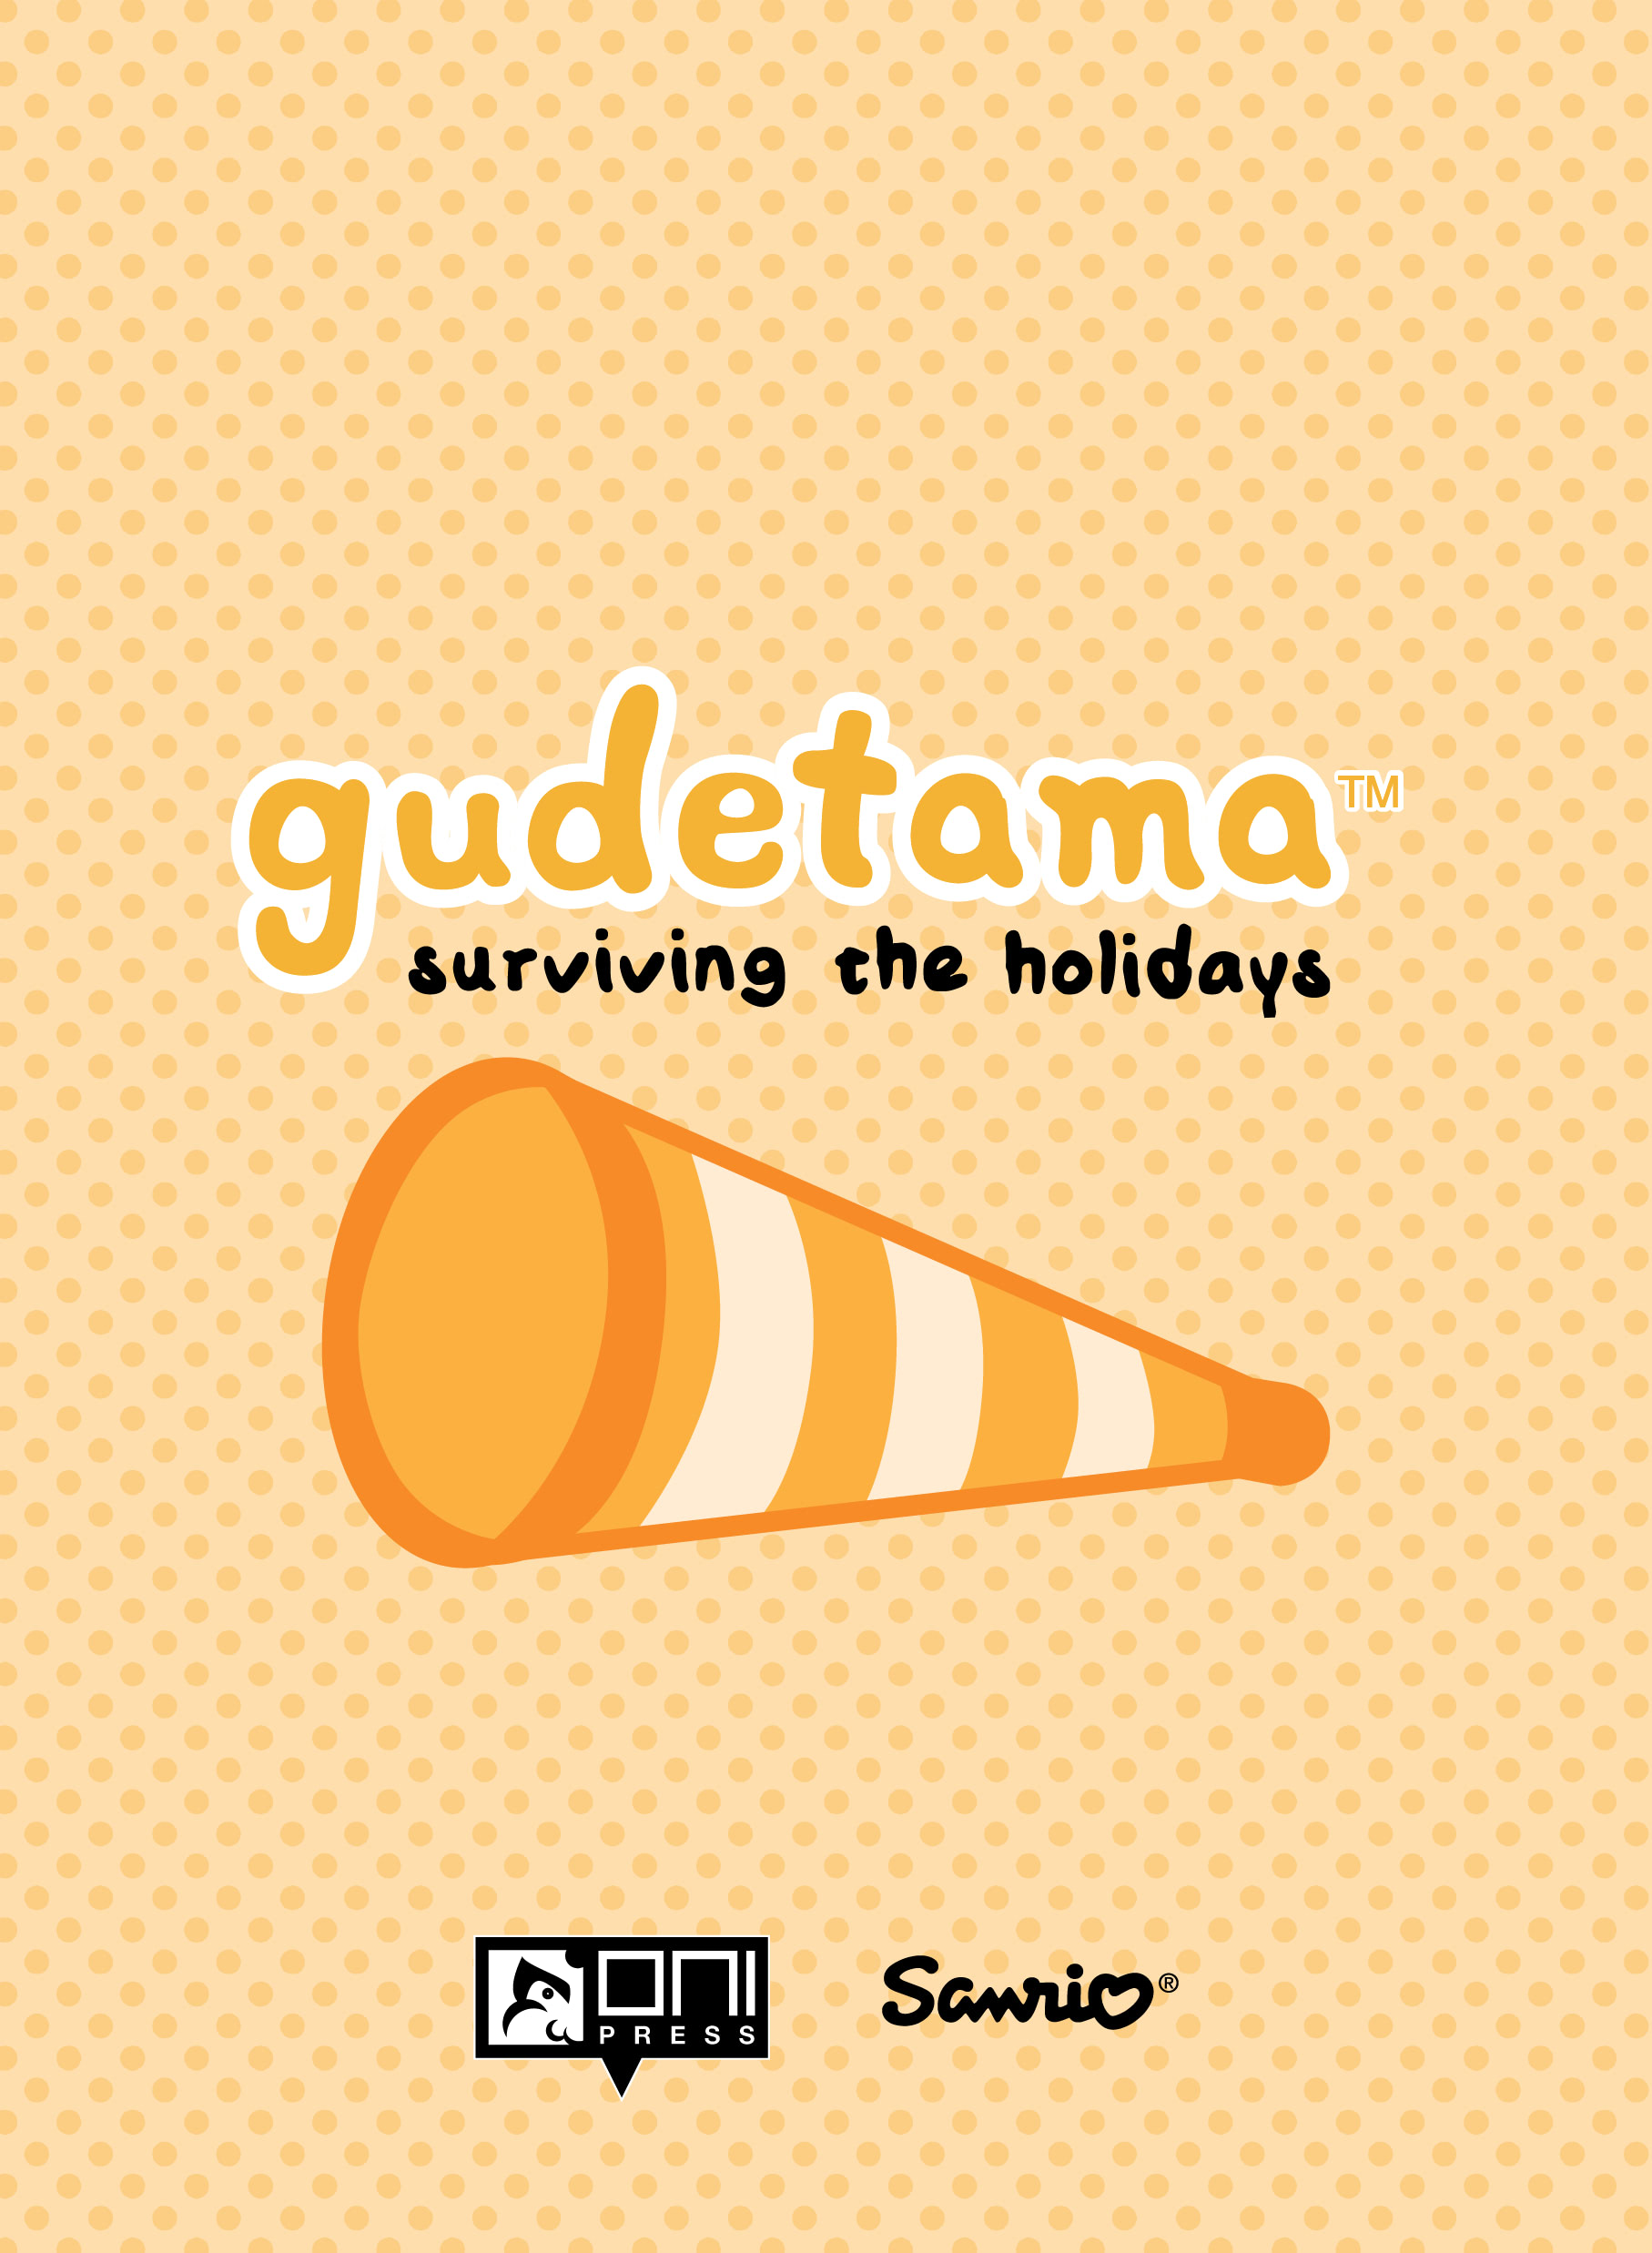 Read online Gudetama comic -  Issue # Surviving the Holidays - 2